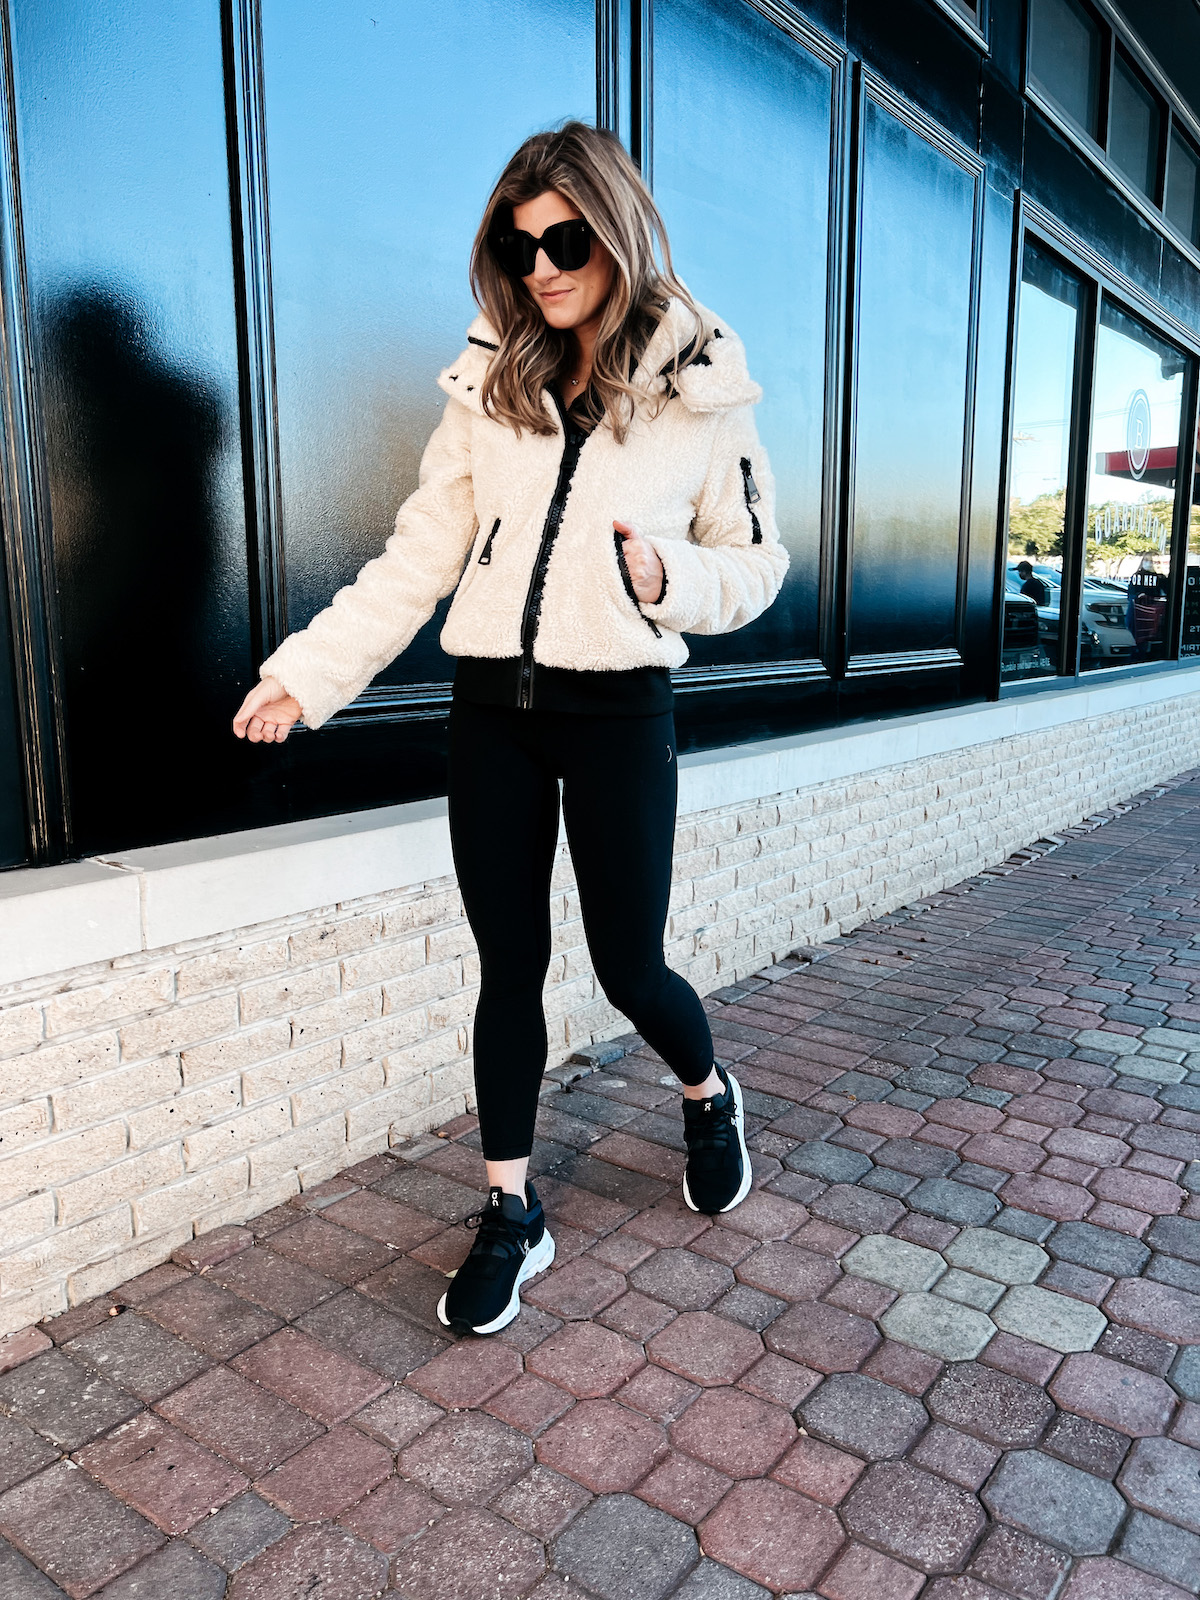 Brighton Butler wearing Backcountry sherpa jacket with black leggings and on cloud sneakers